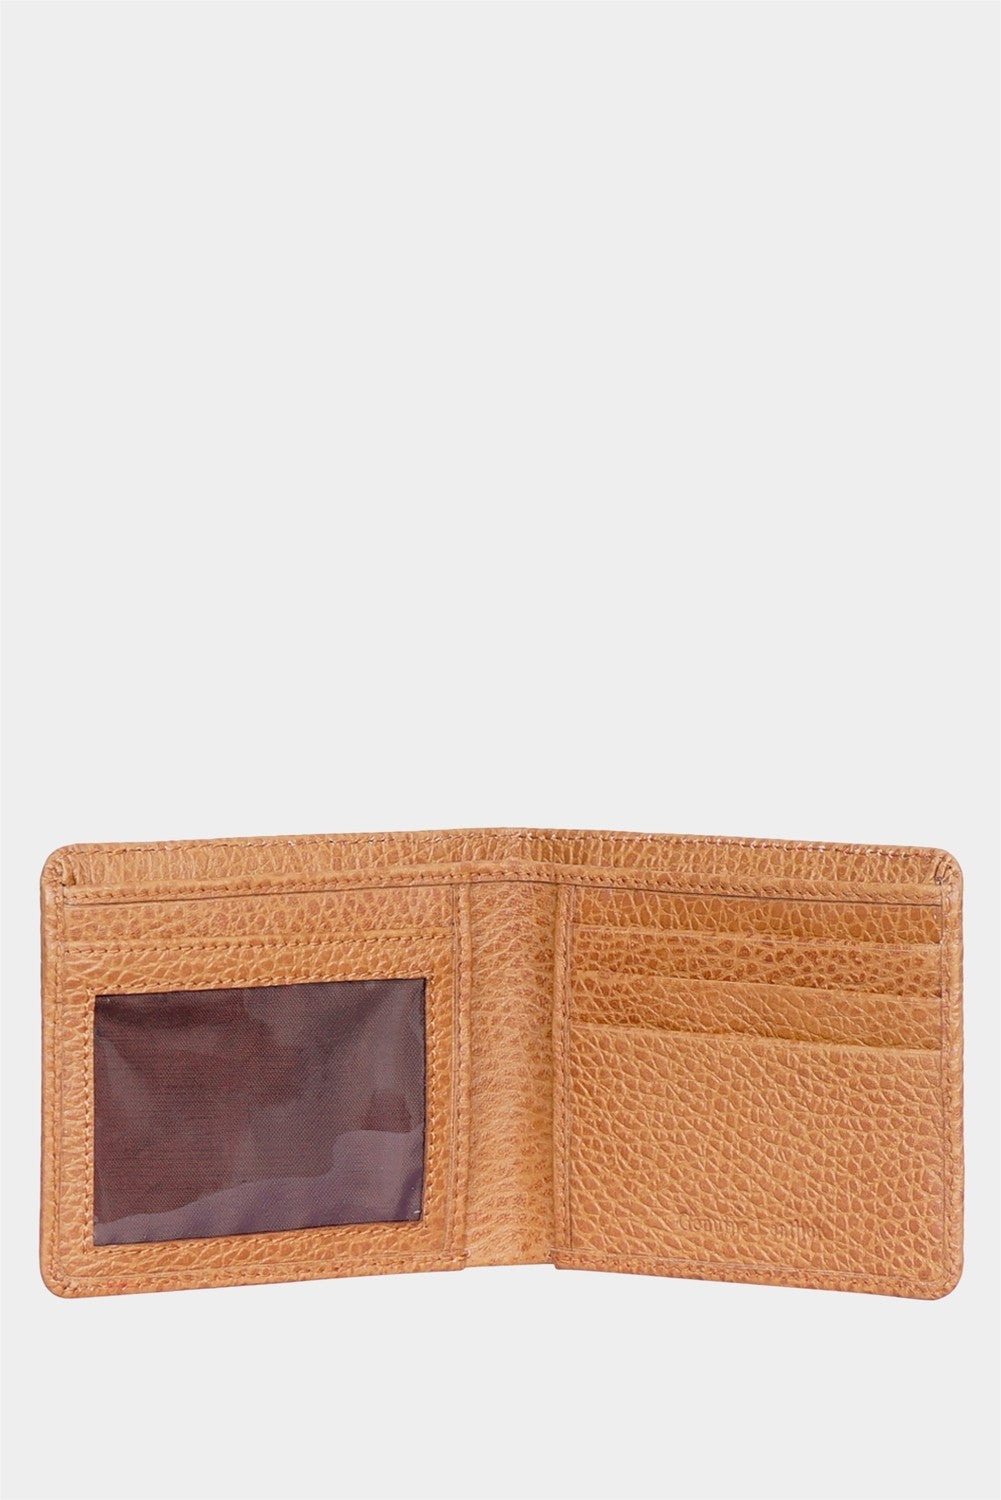 Justanned Tan Men Wallet With Brown Patch